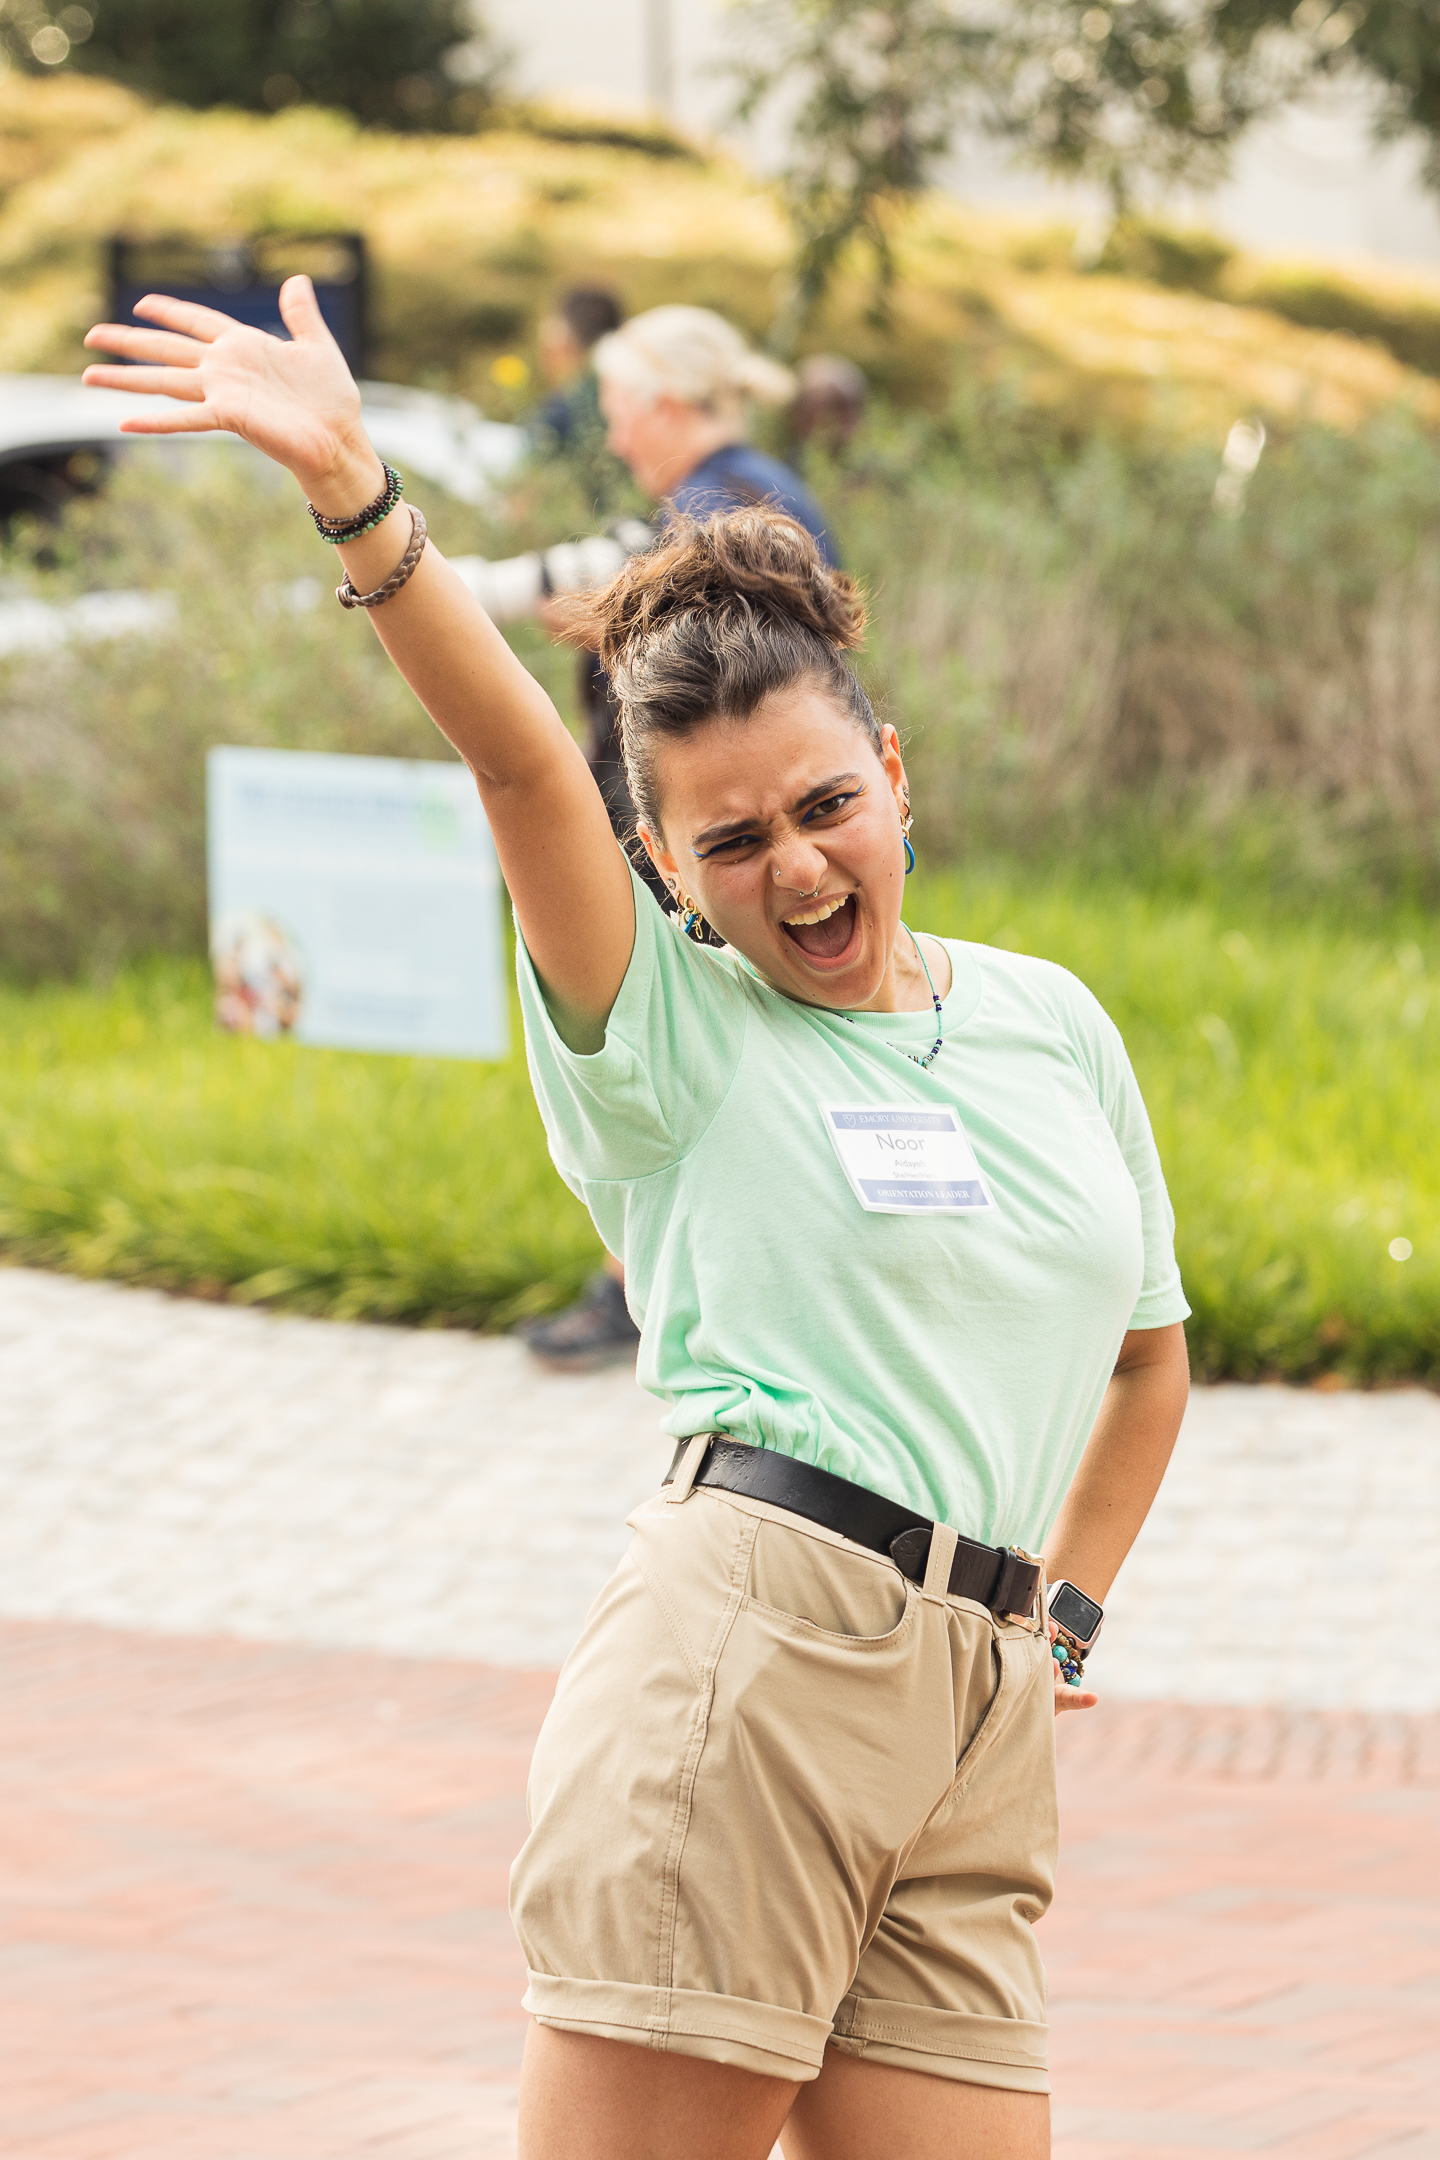 student orientation leader with hand in air brandon clifton atlanta photographer